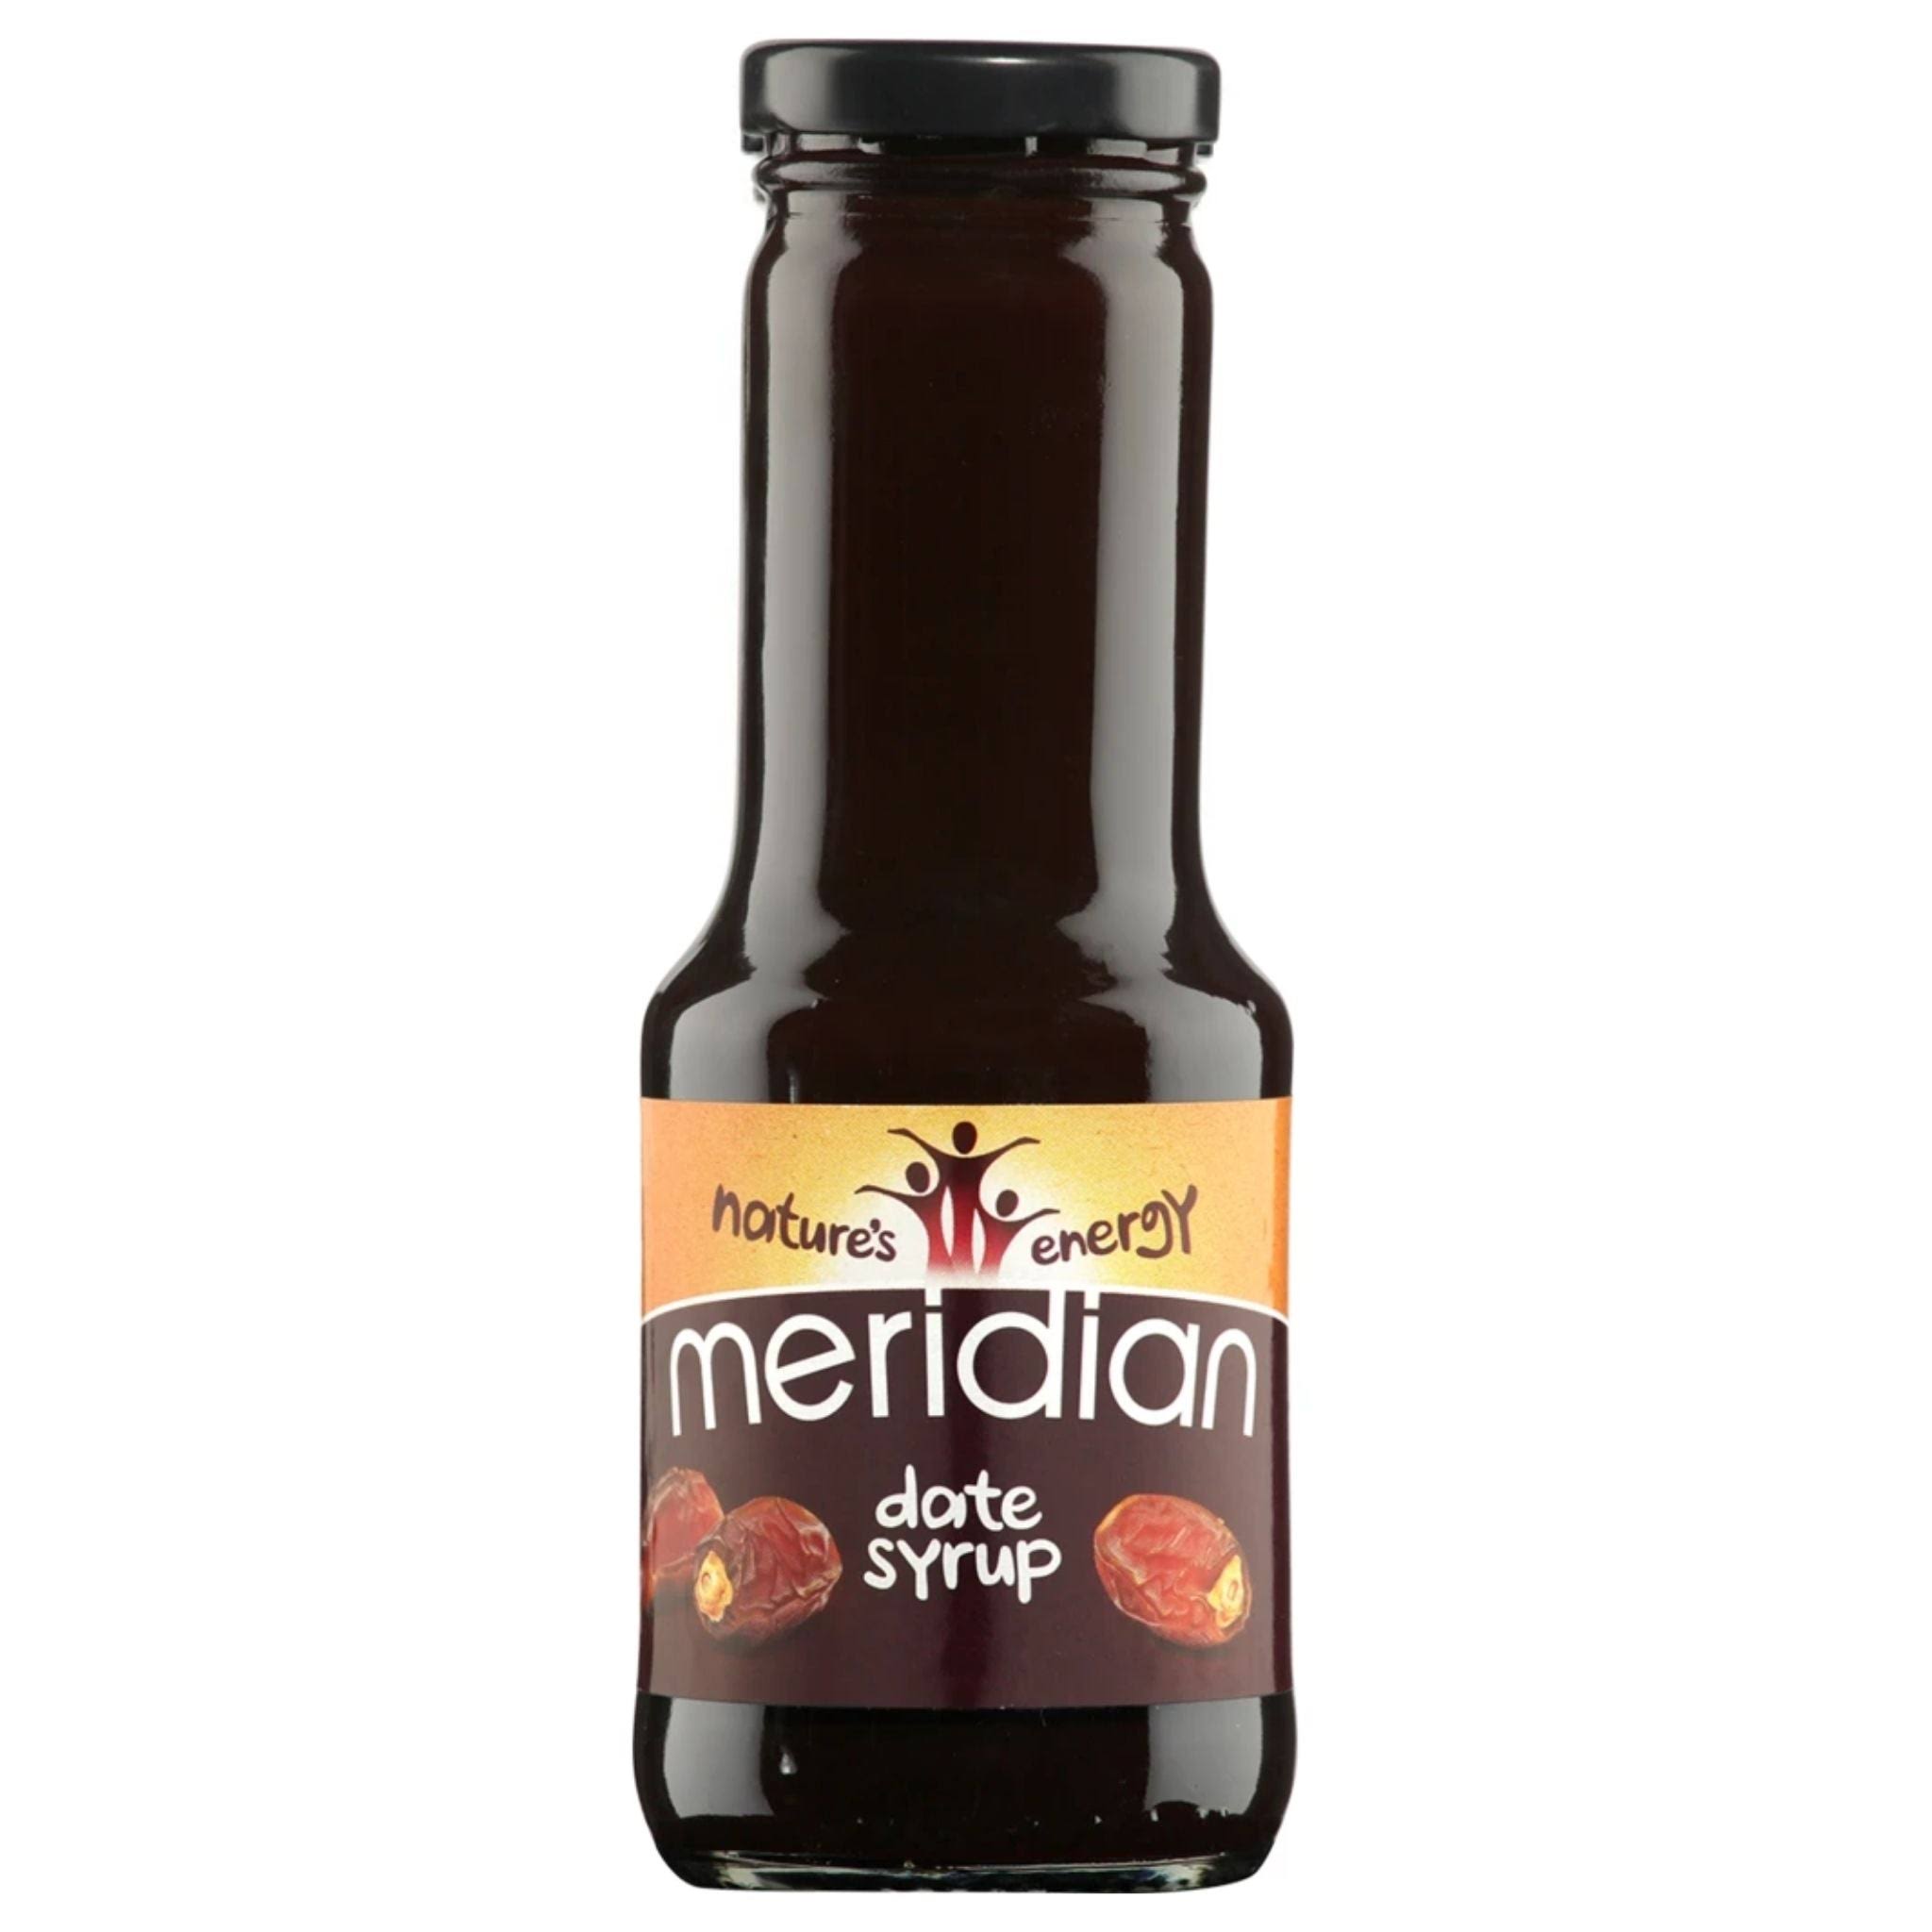 Meridian - Date Syrup 330g